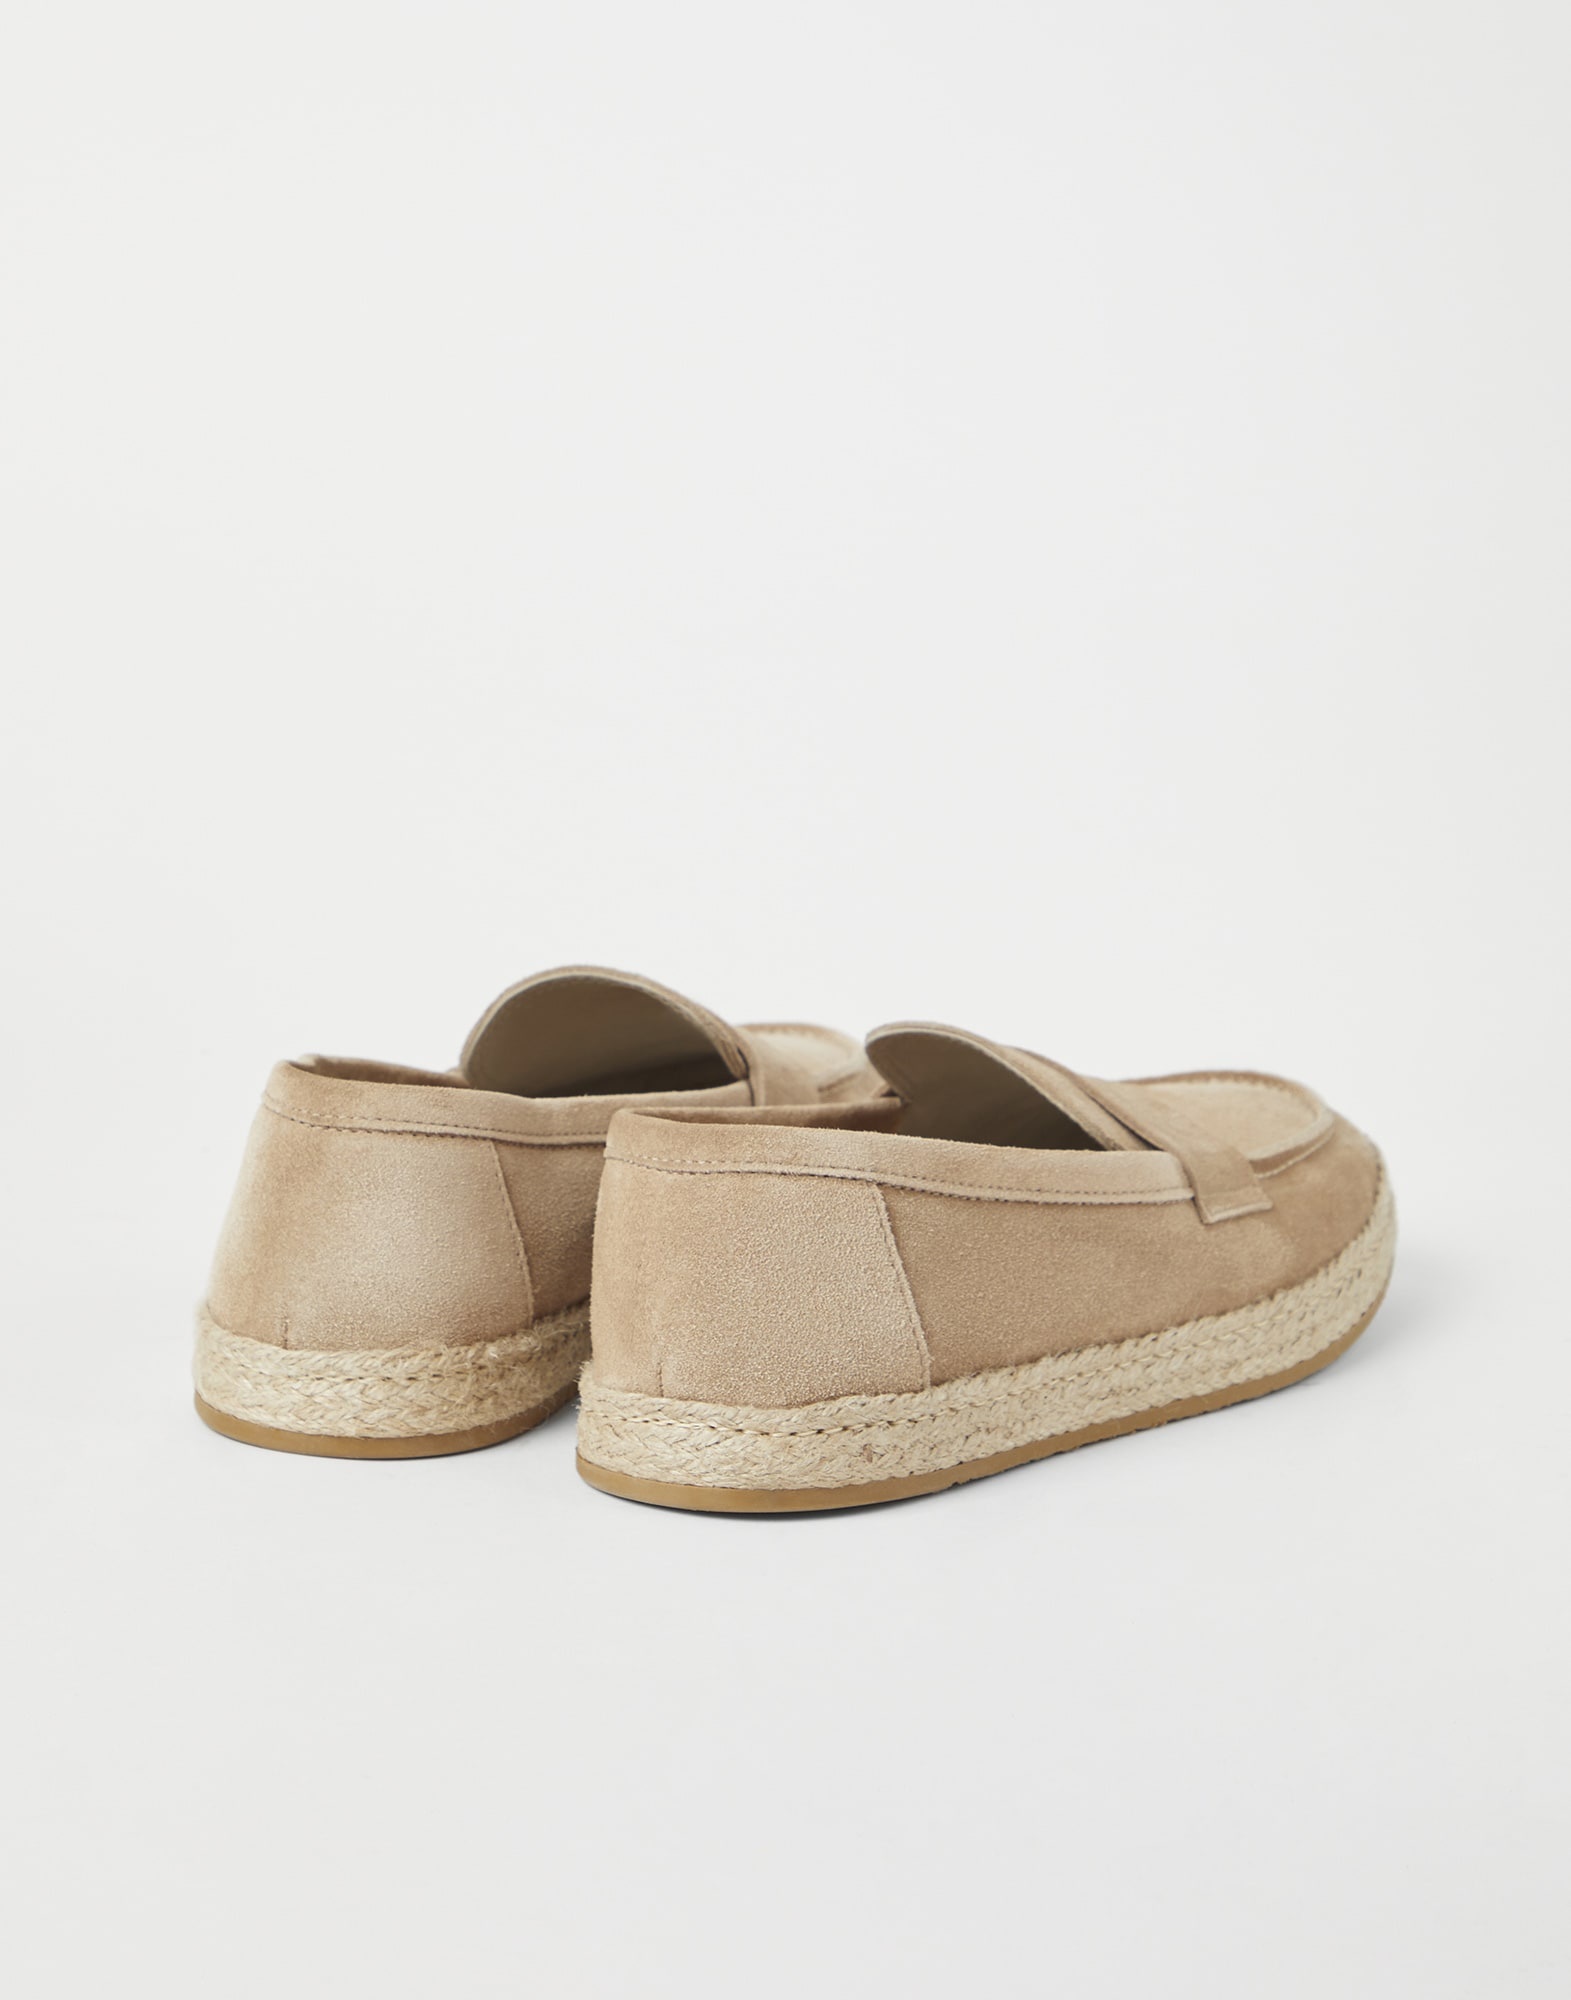 Suede loafer sneakers with rope insert - 3